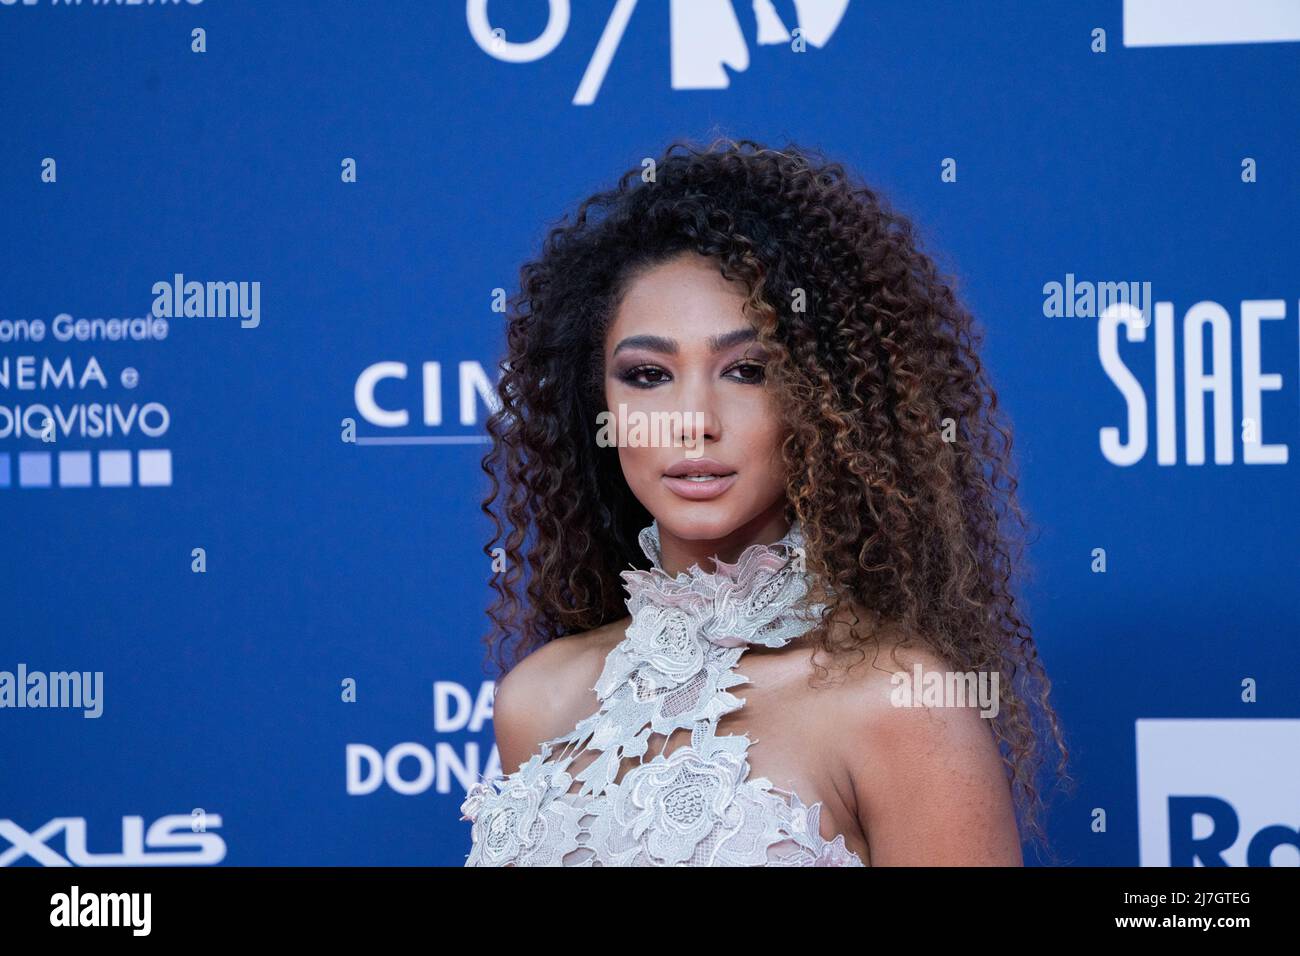 Rome, Italy, May 3, 2022 - Samira Lui with  attends at the red carpet at 'David di Donatello 'prize 2022. Credits: Luigi de Pompeis/Alamy Live News Stock Photo